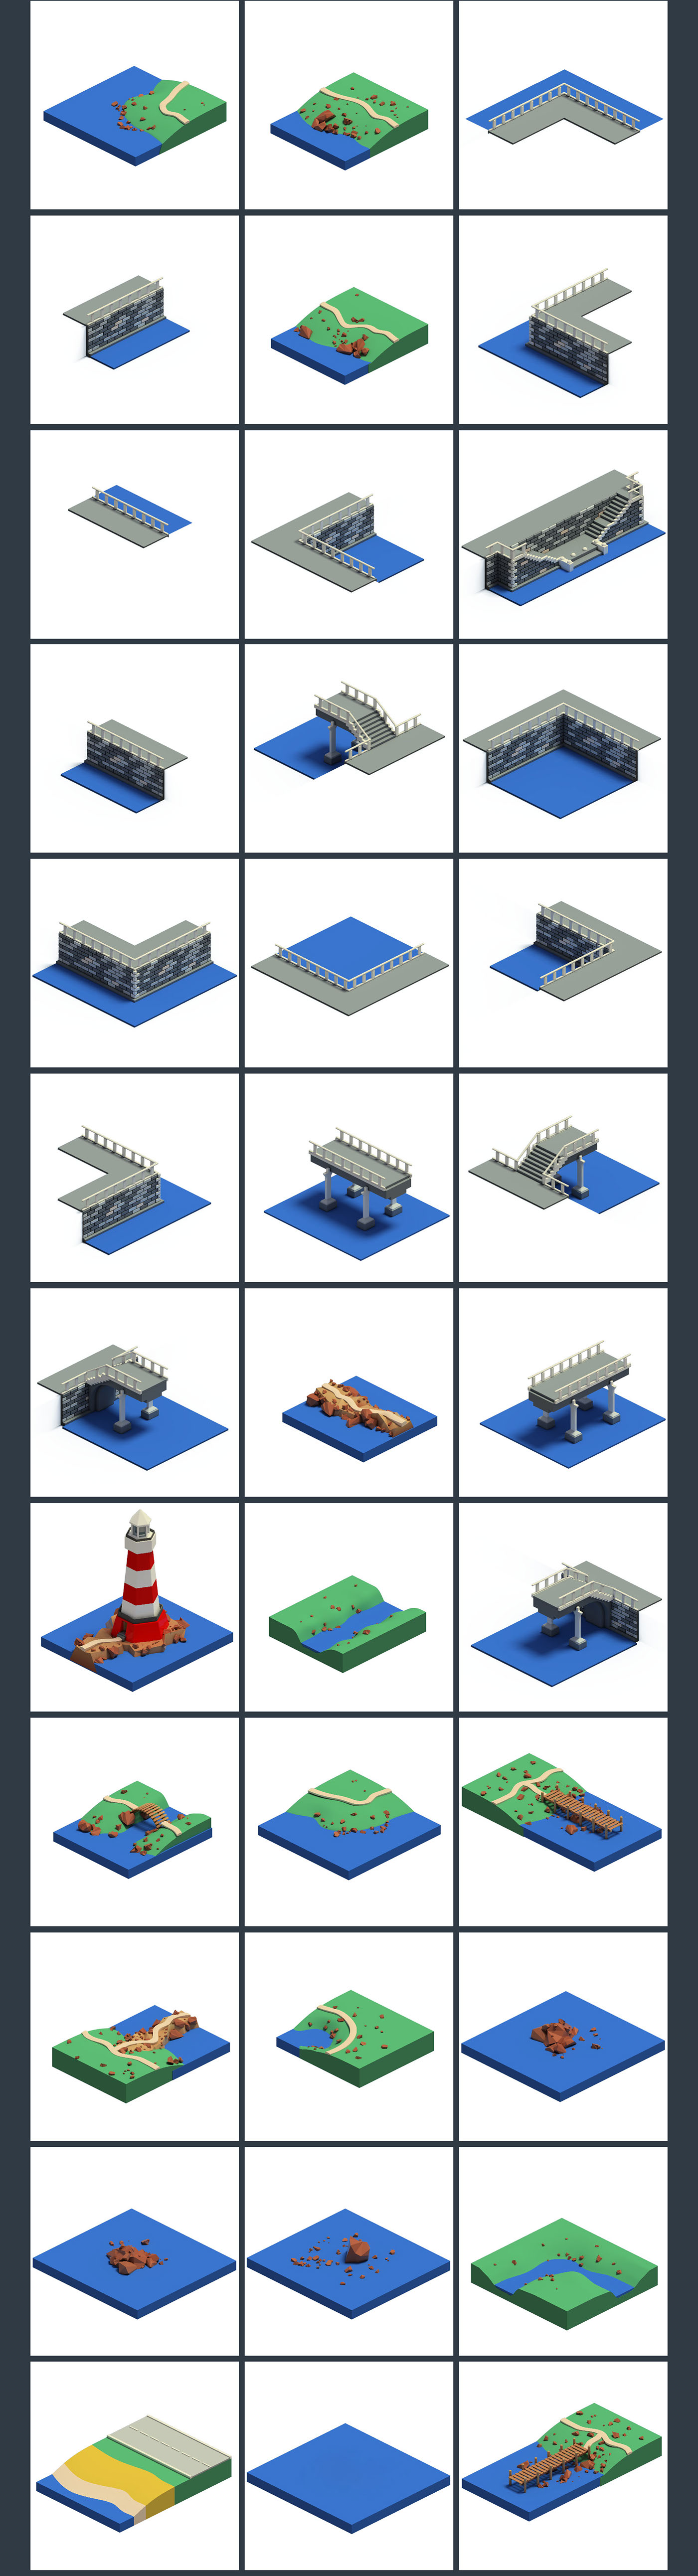 maps Isometric 3D infographics real estate Website people vehicles